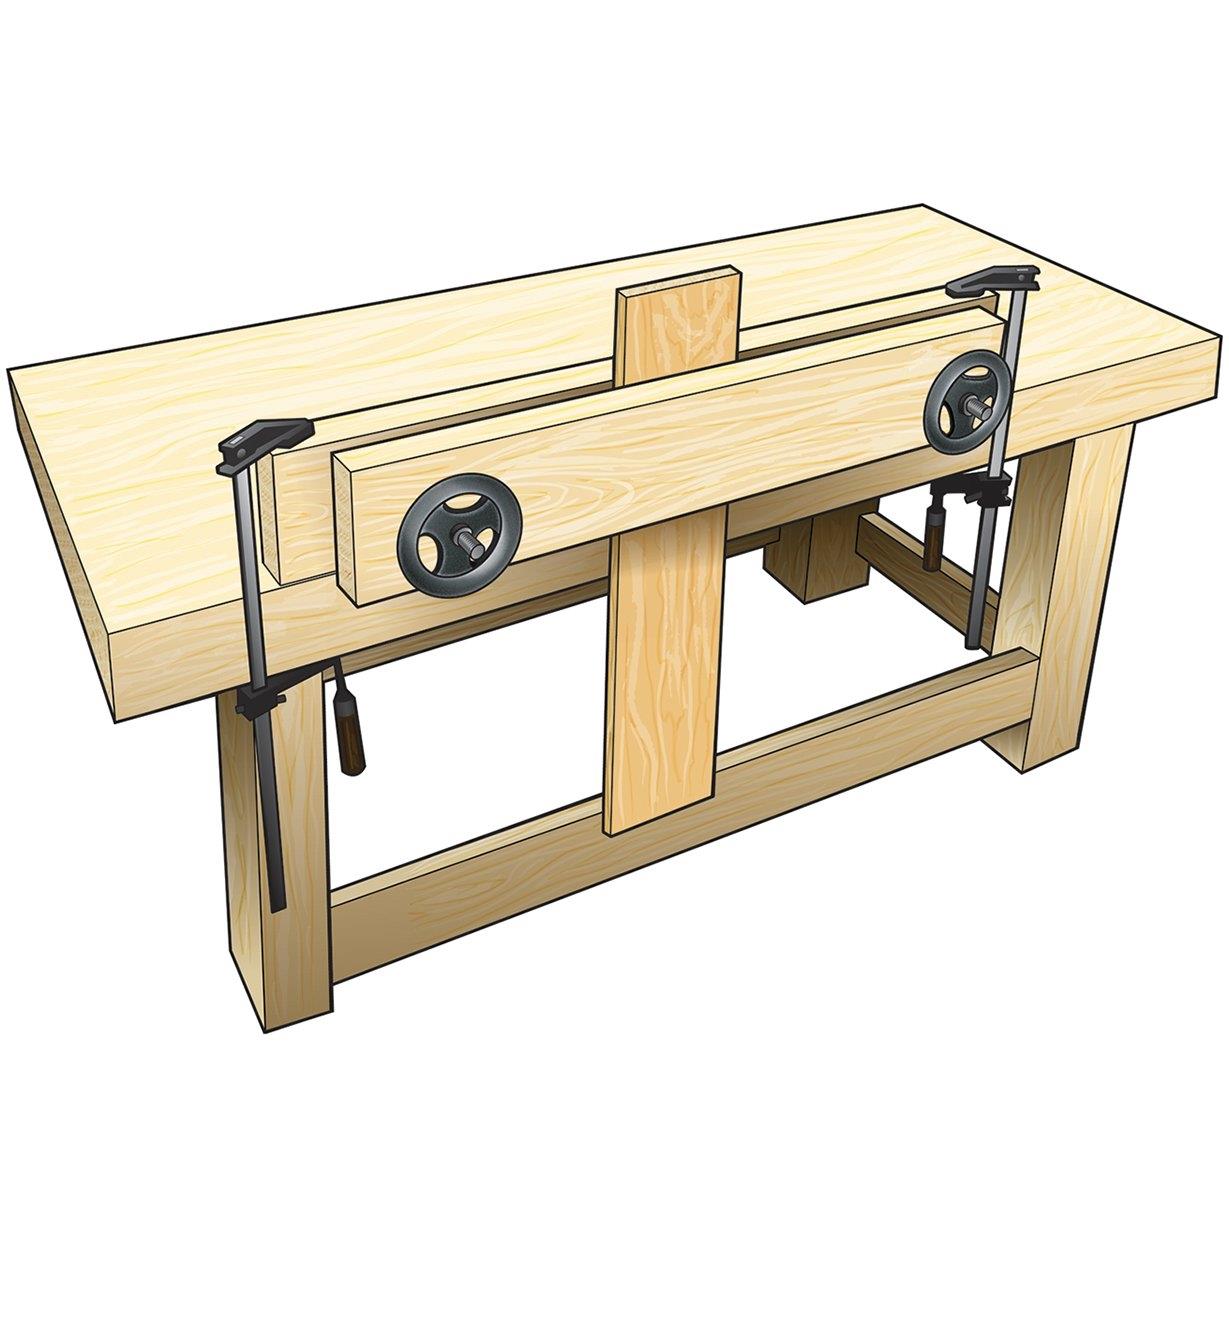 Illustration of completed Benchcrafted Moxon vise on workbench